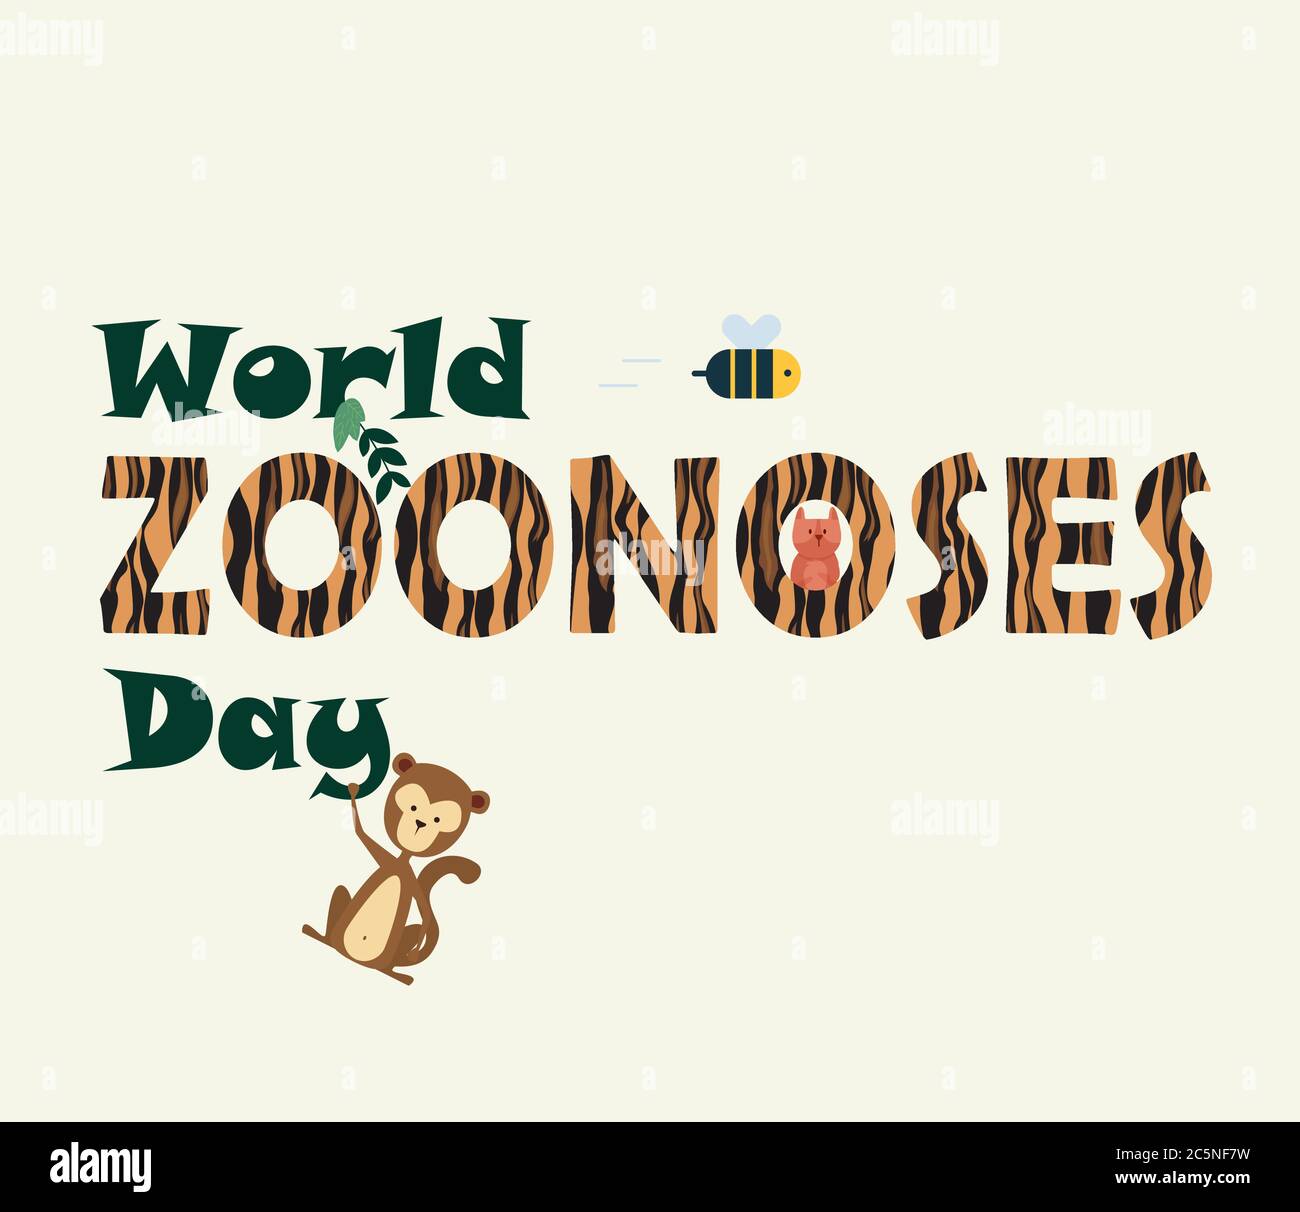 World Zoonoses Day, animals in the jungle with tiger stripes poster, background, illustration vector Stock Vector